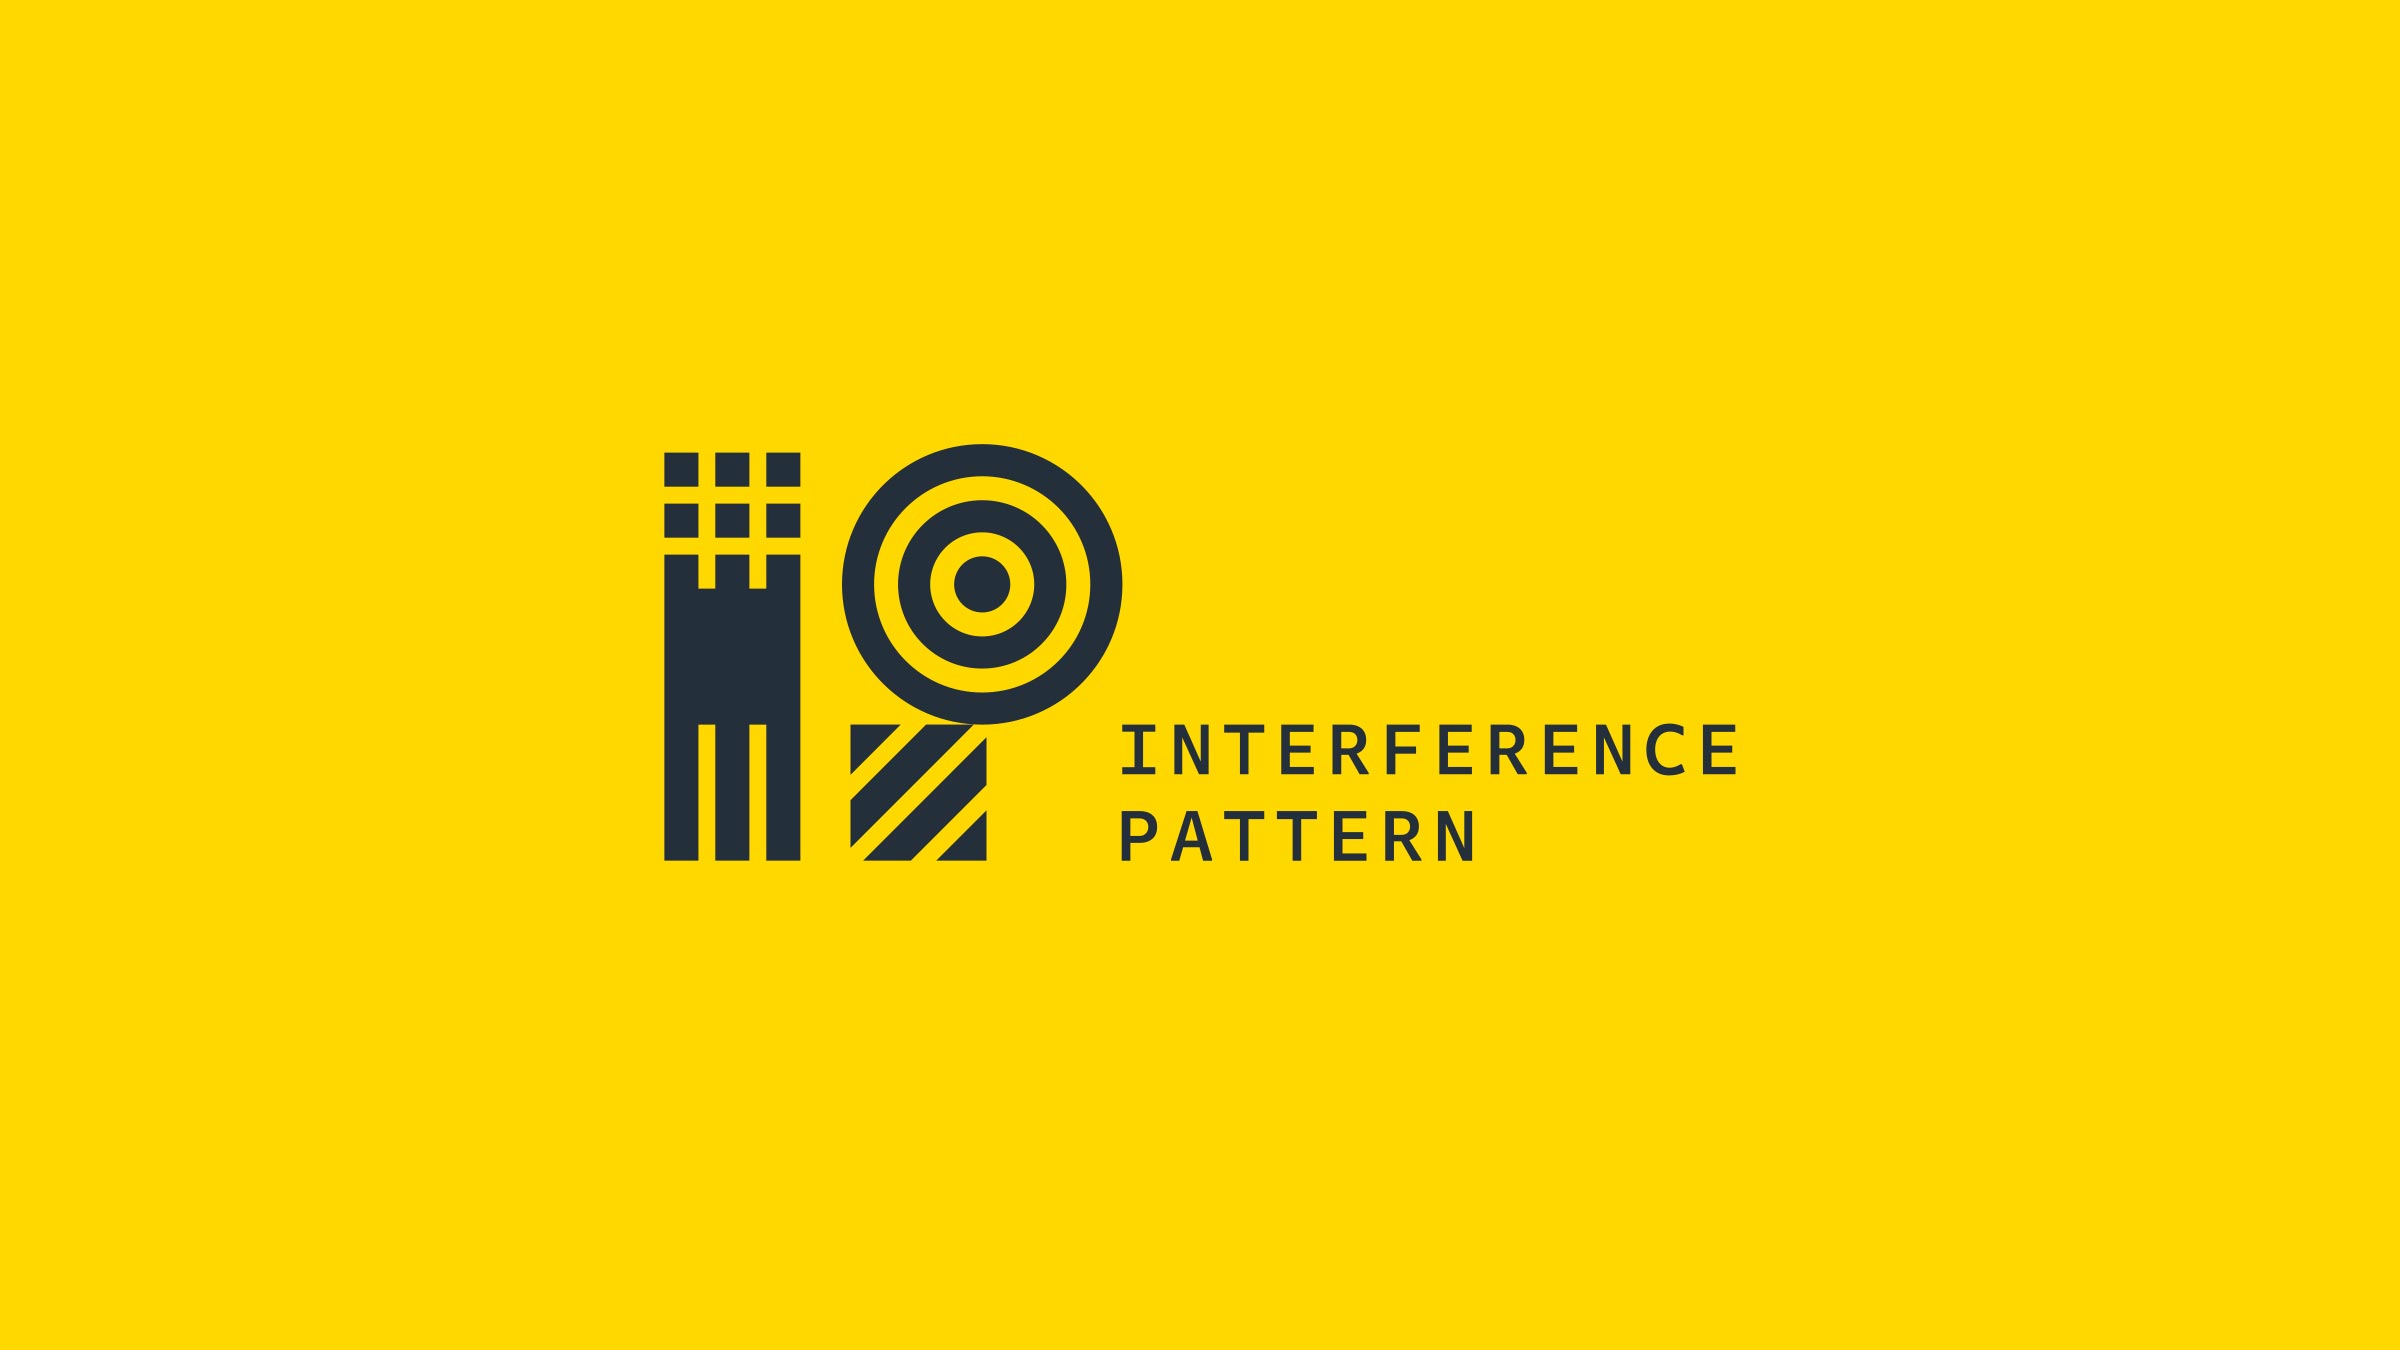 Interference Pattern branding and identity logo by Monumentum Brands